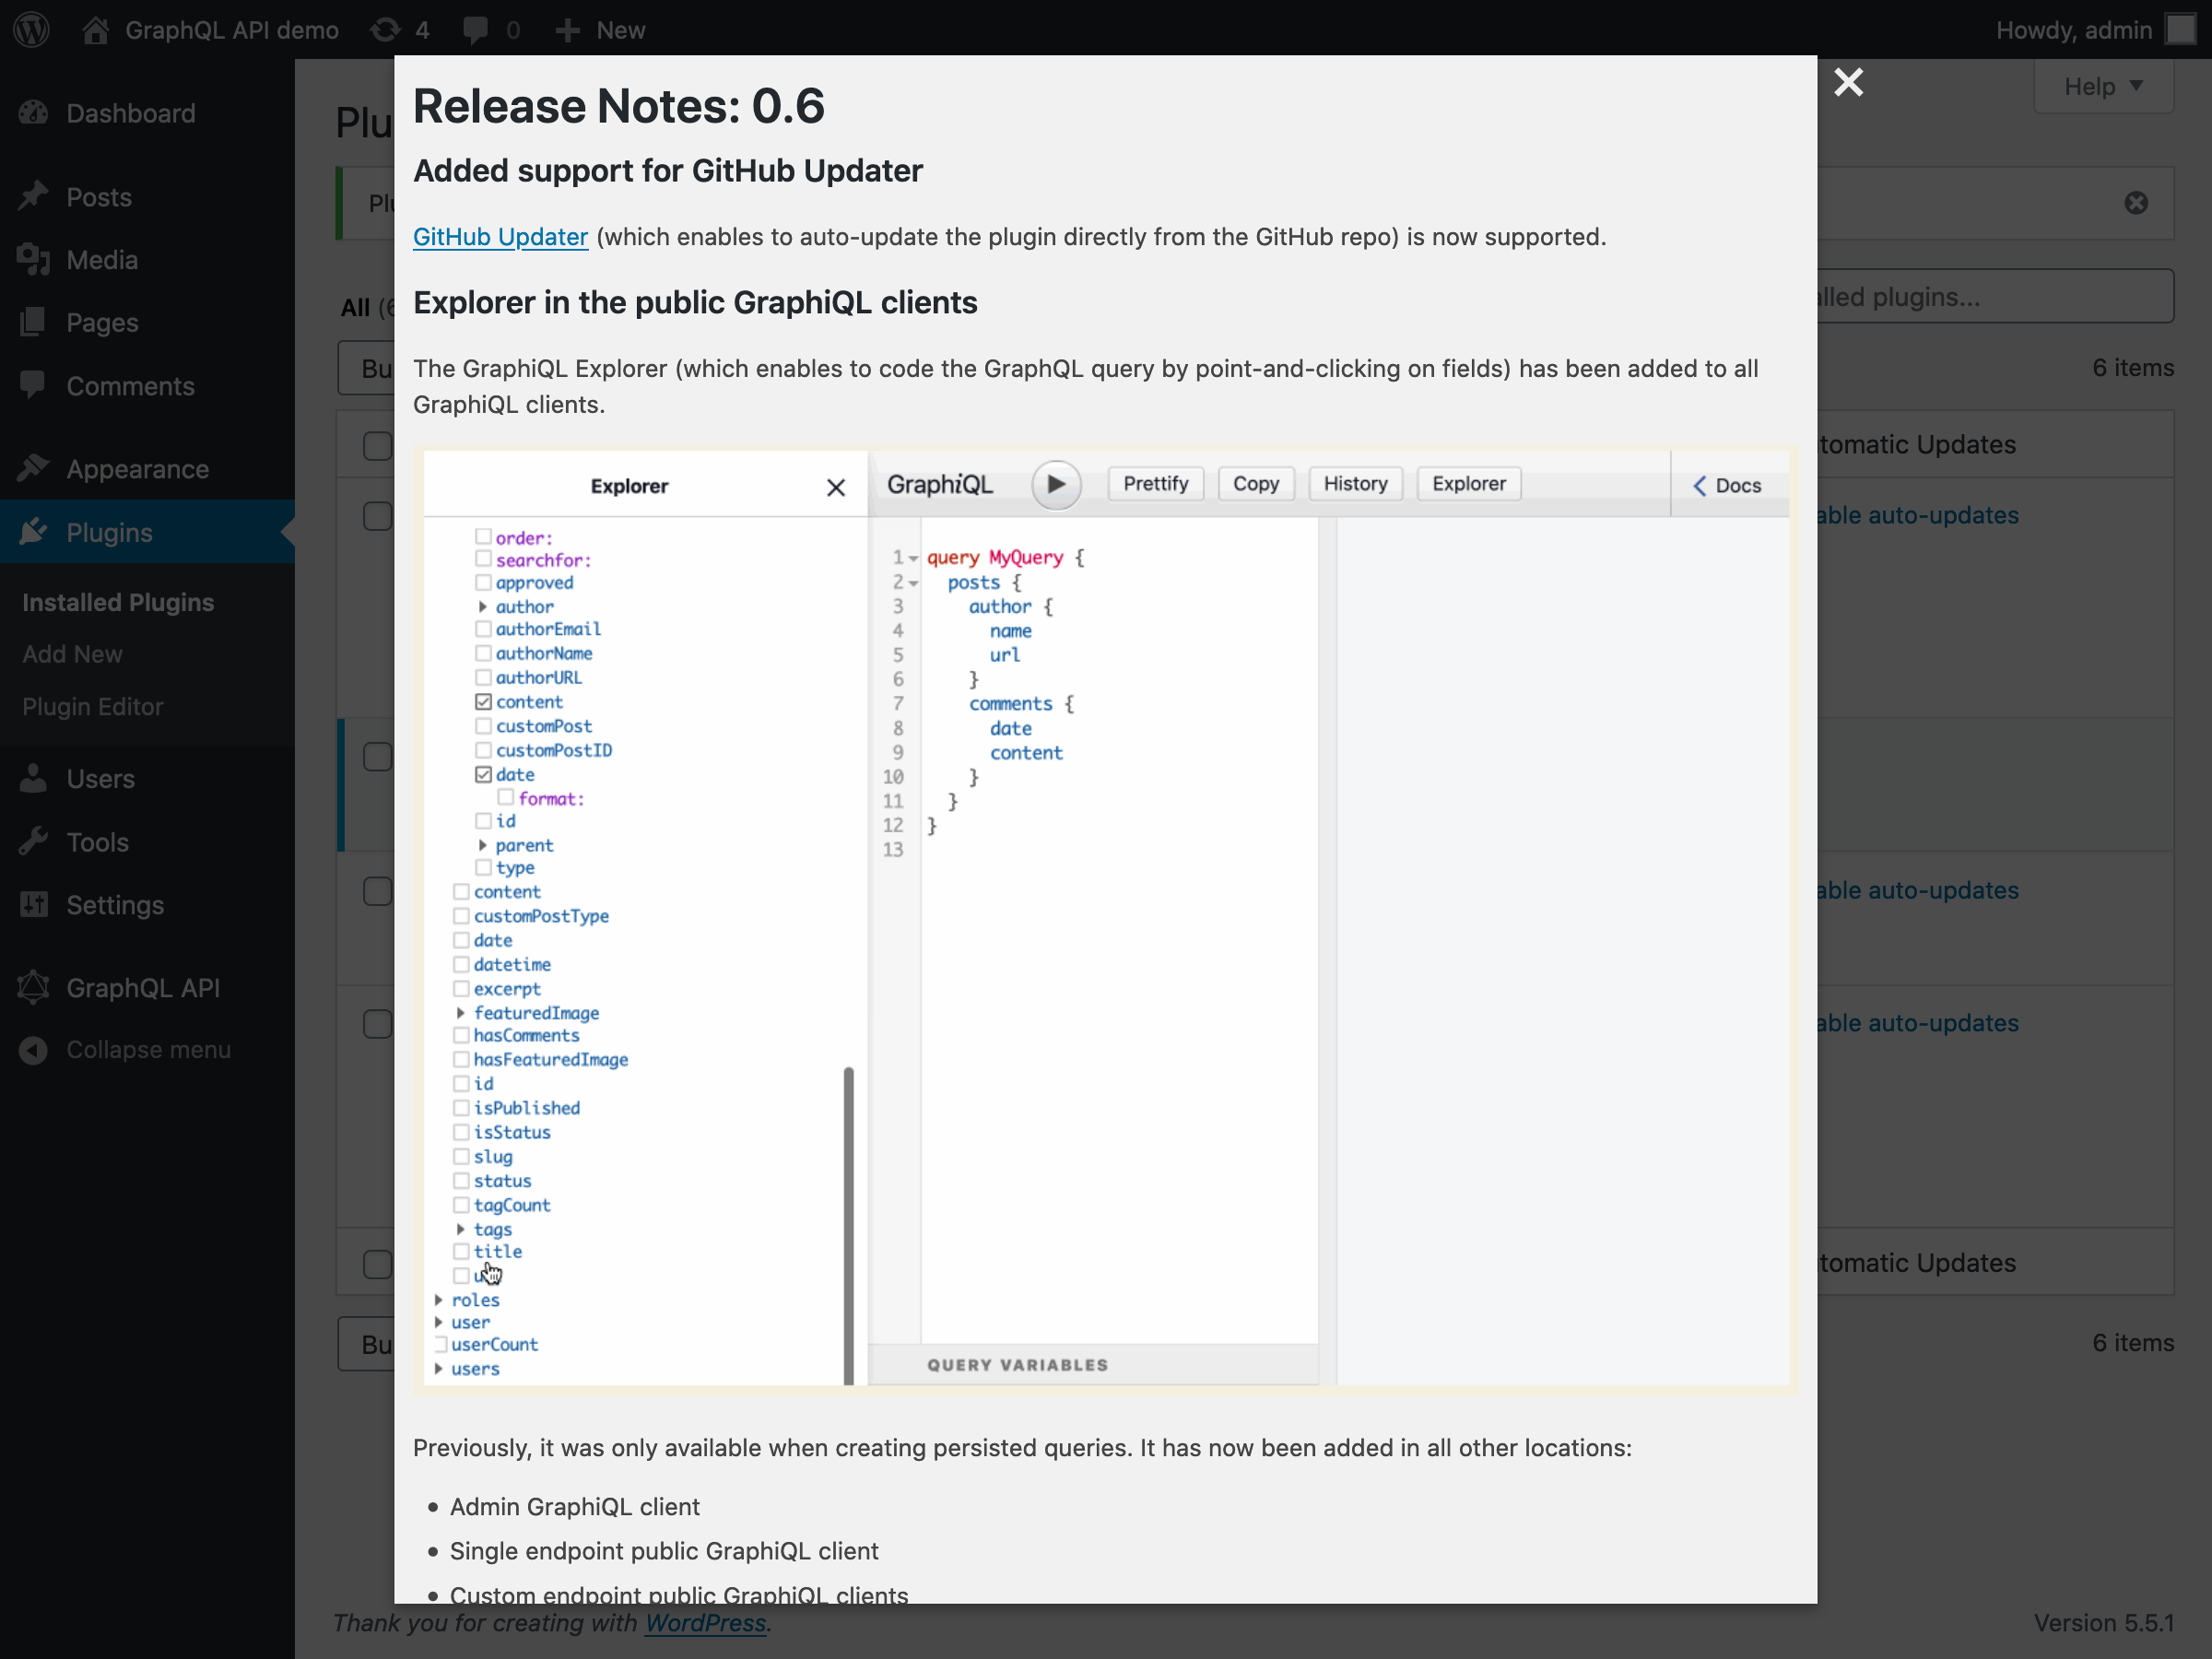 Release notes in a modal window